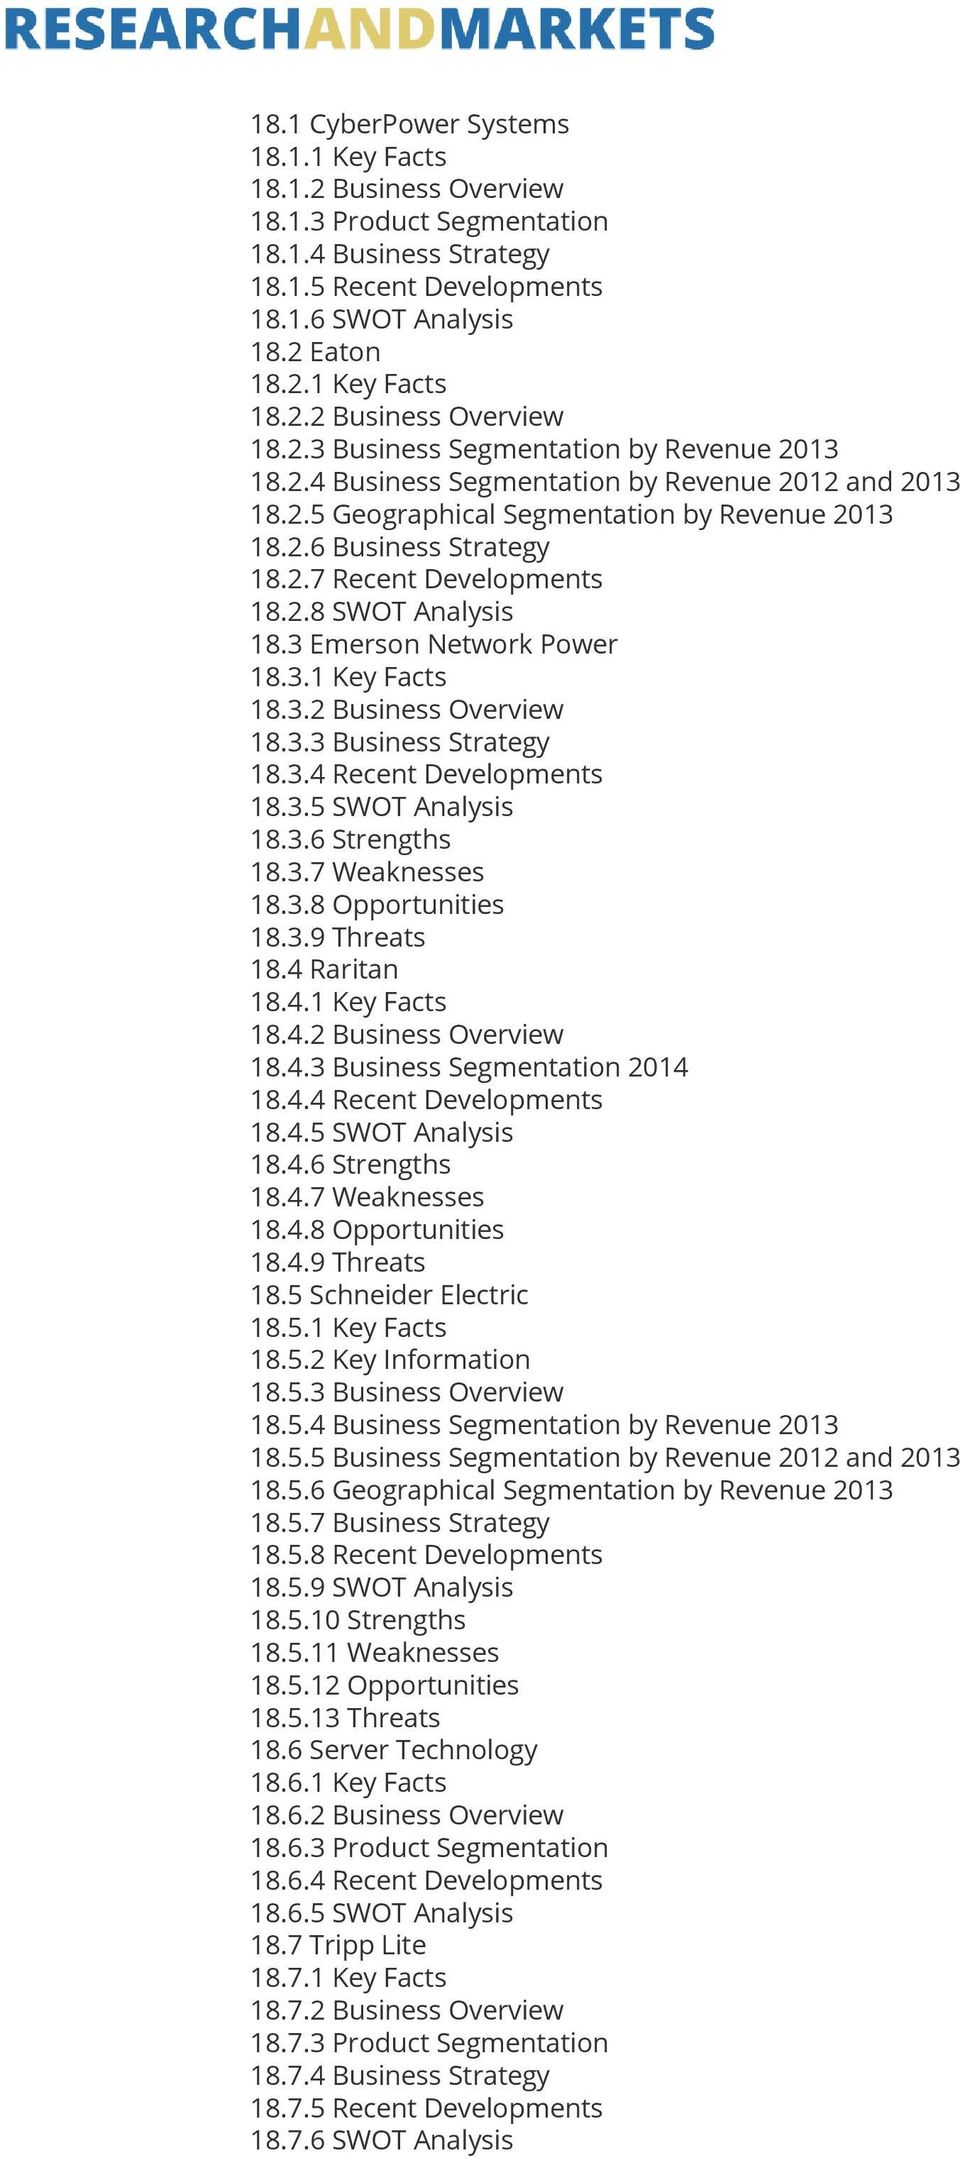 3 Emerson Network Power 18.3.1 Key Facts 18.3.2 Business Overview 18.3.3 Business Strategy 18.3.4 Recent Developments 18.3.5 SWOT Analysis 18.3.6 Strengths 18.3.7 Weaknesses 18.3.8 Opportunities 18.3.9 Threats 18.